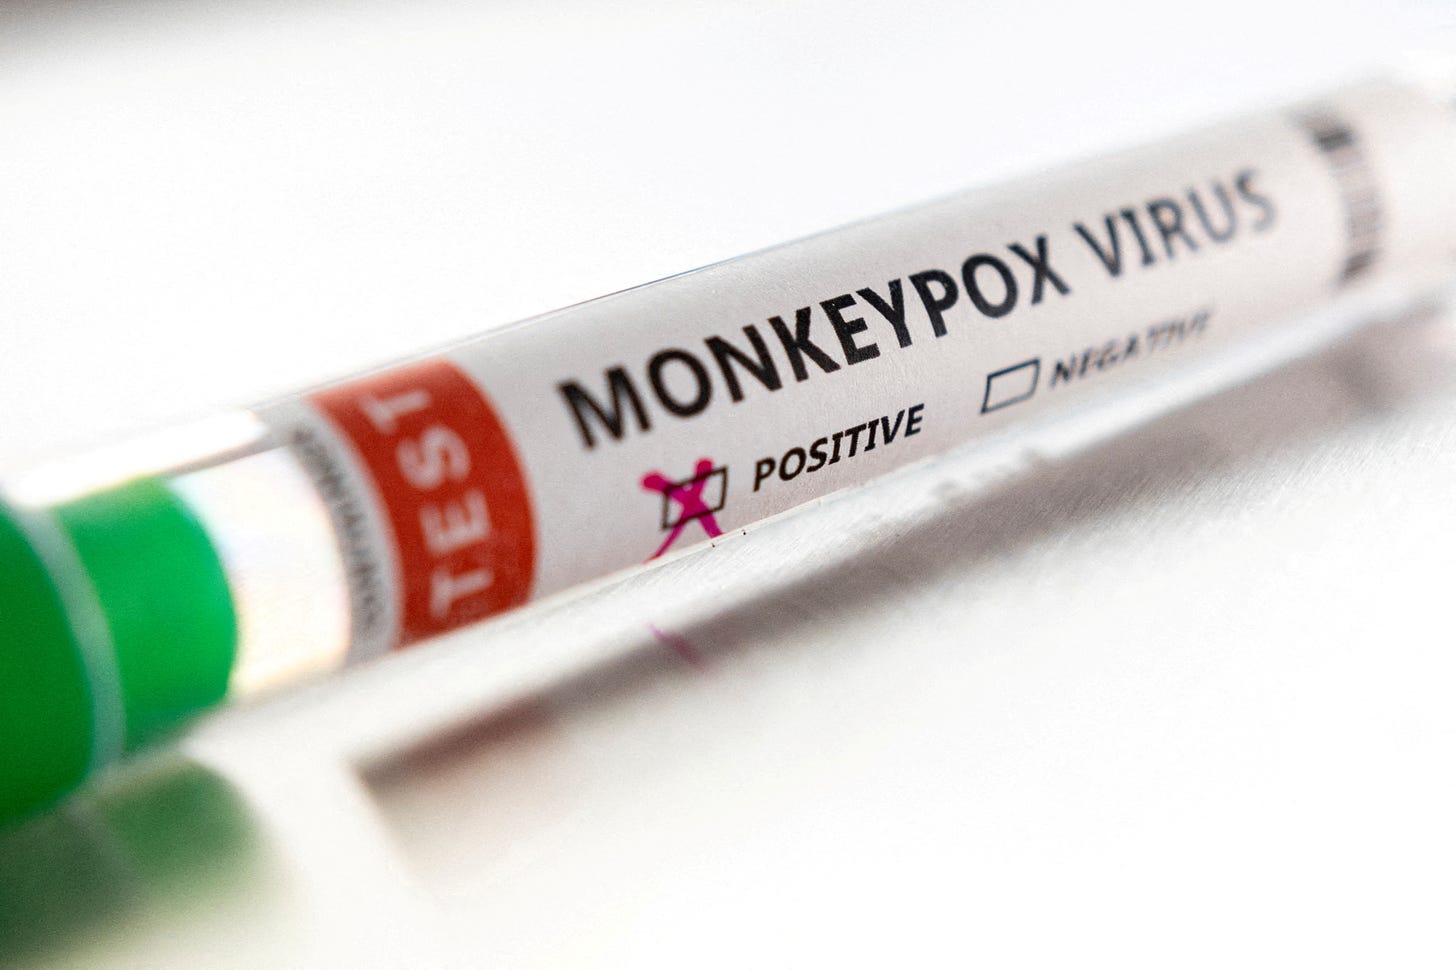 Increasing numbers of people are testing positive for monkeypox in the UK